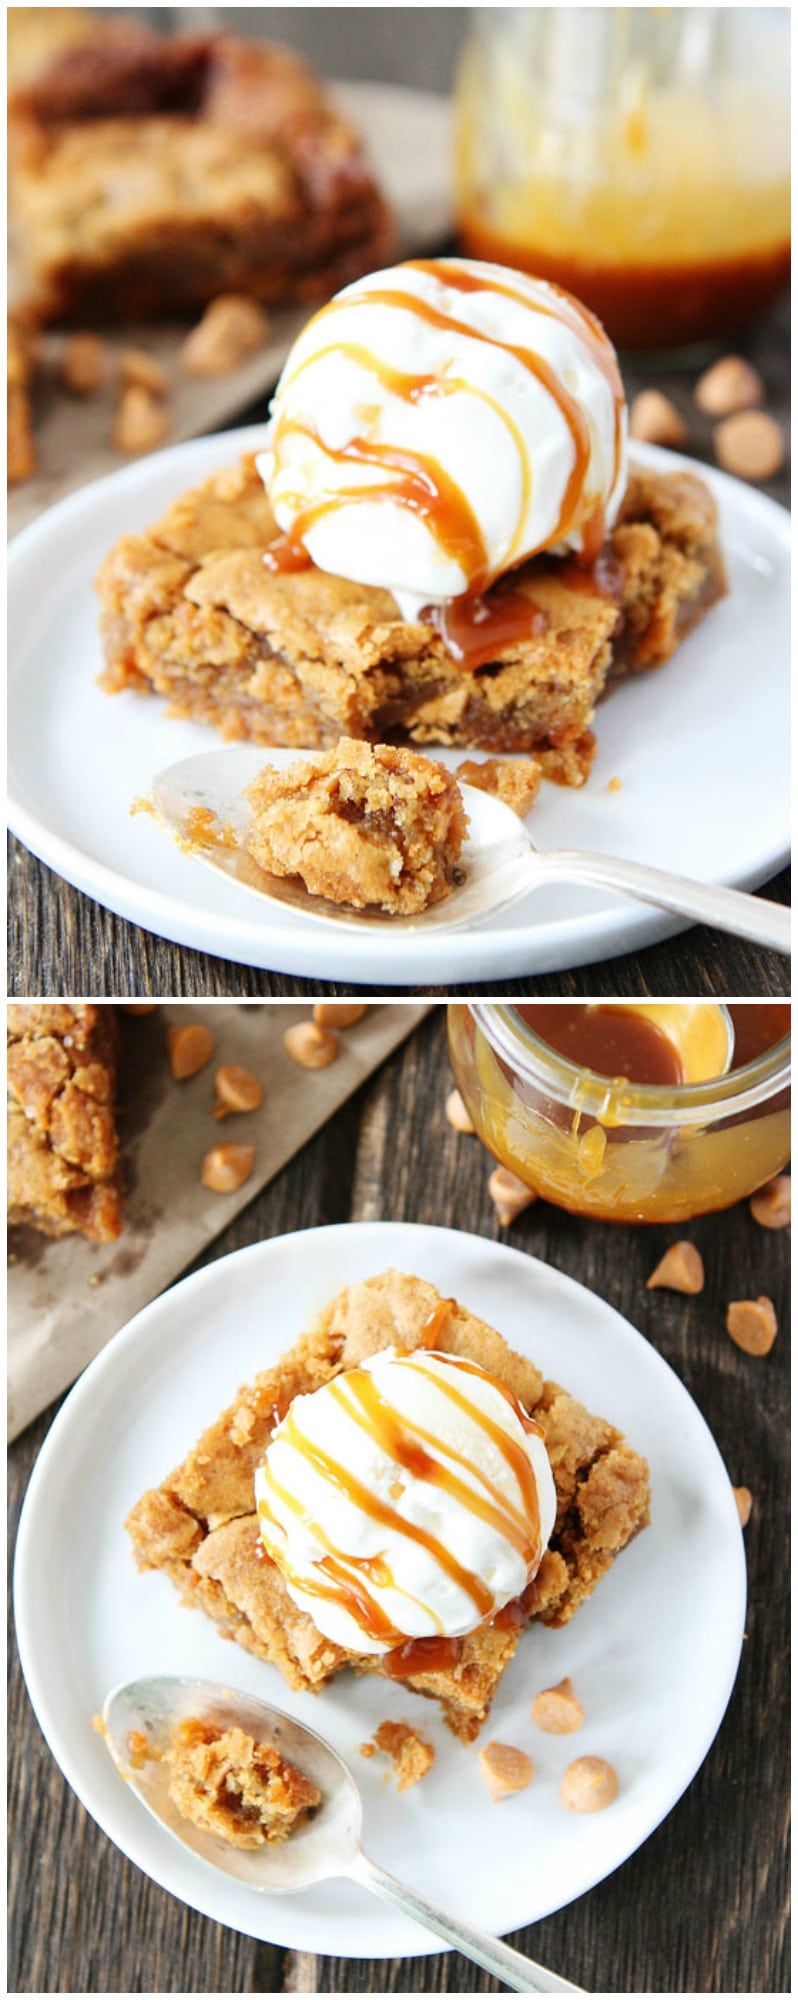 Salted Caramel Butterscotch Blondie Recipe on twopeasandtheirpod.com Chewy blondies with butterscotch chips and salted caramel sauce. This easy blondie recipe is perfect for parties, potlucks, or every day dessert!